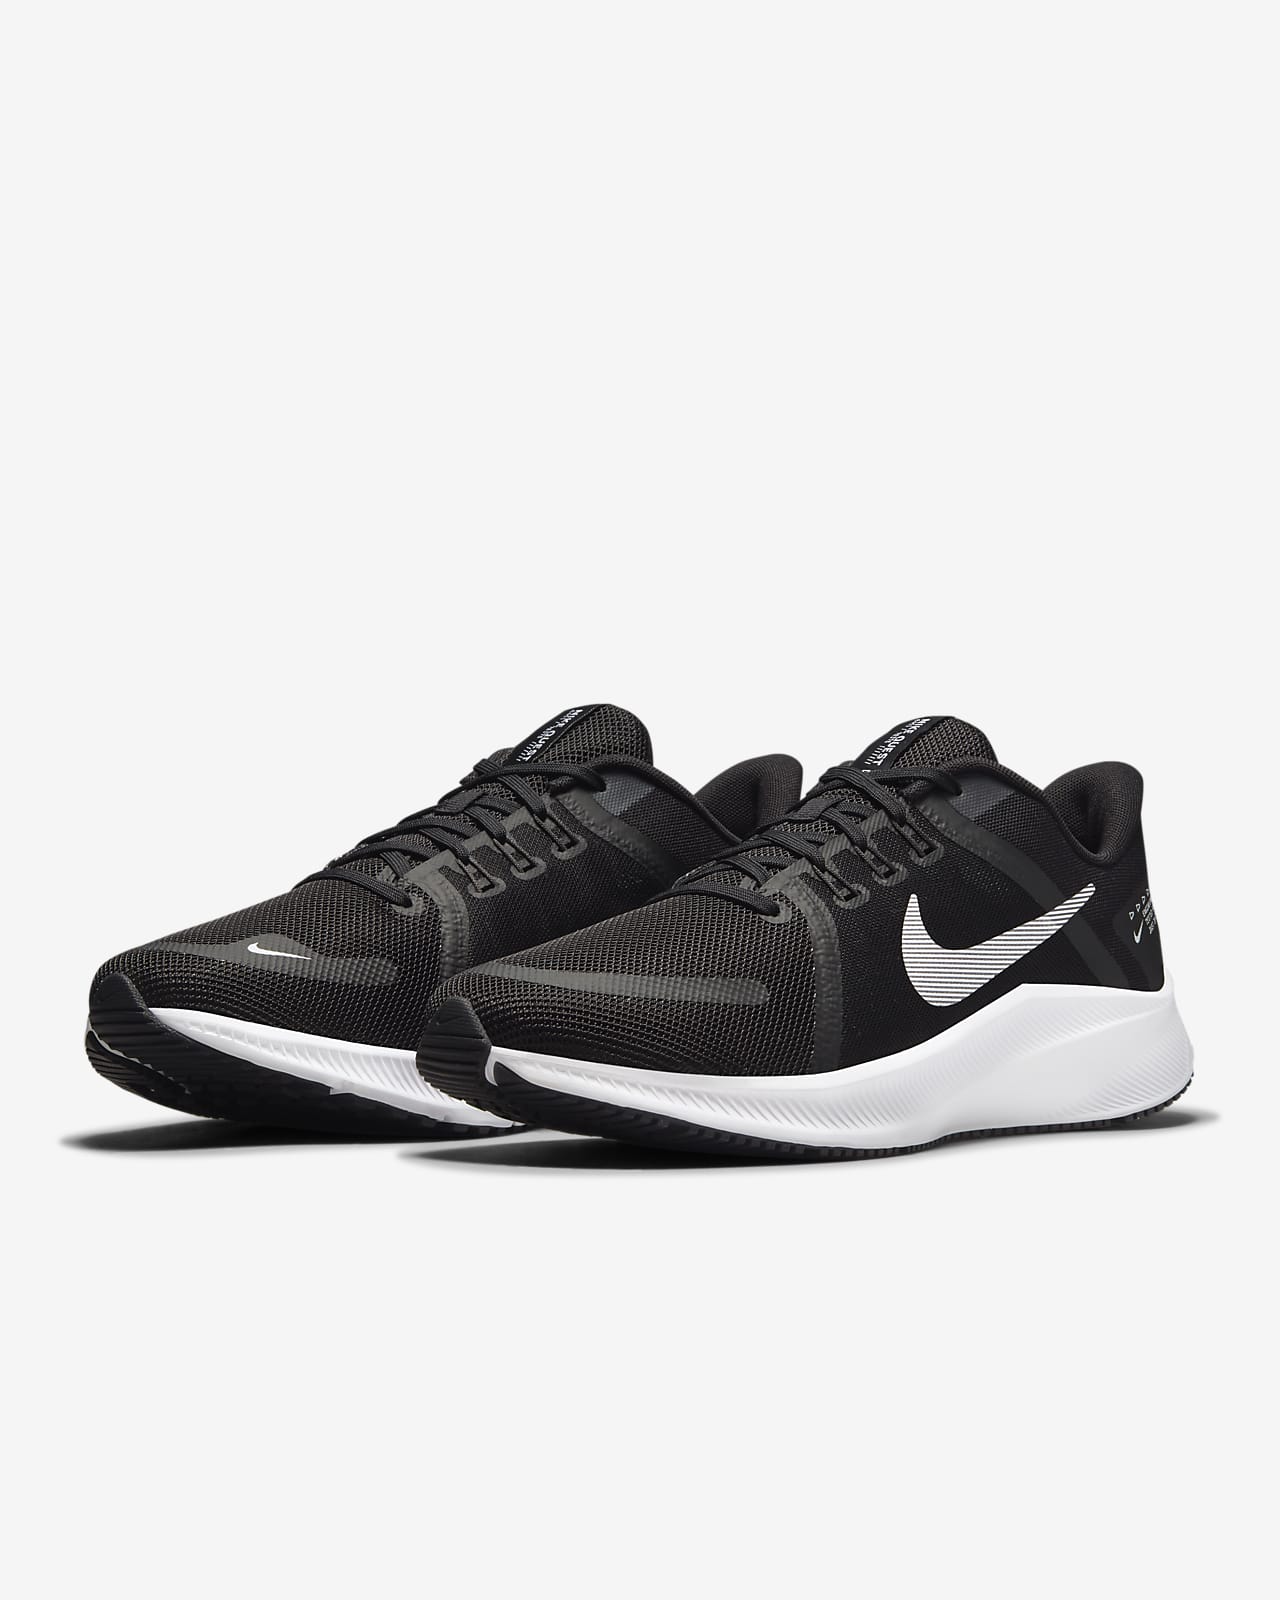 Nike Quest Men's Road Running Shoes. CA